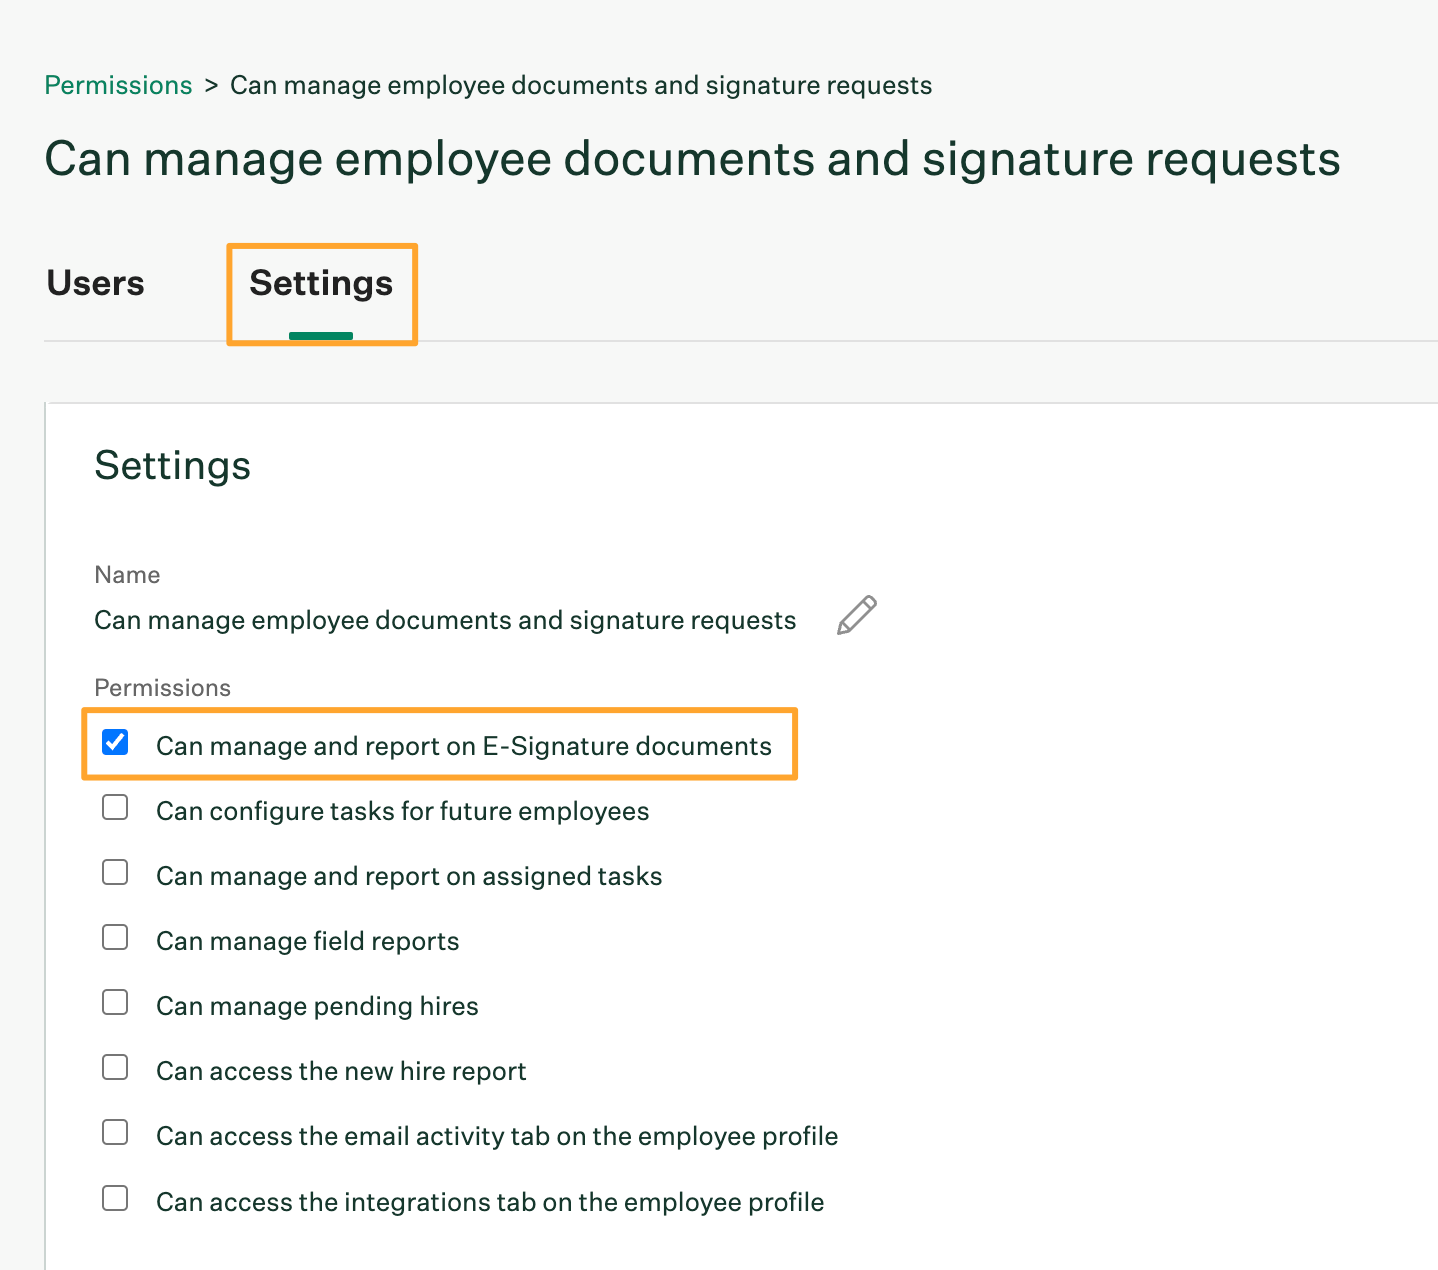 Can manage and report on E-Signature documents permission enabled in custom role